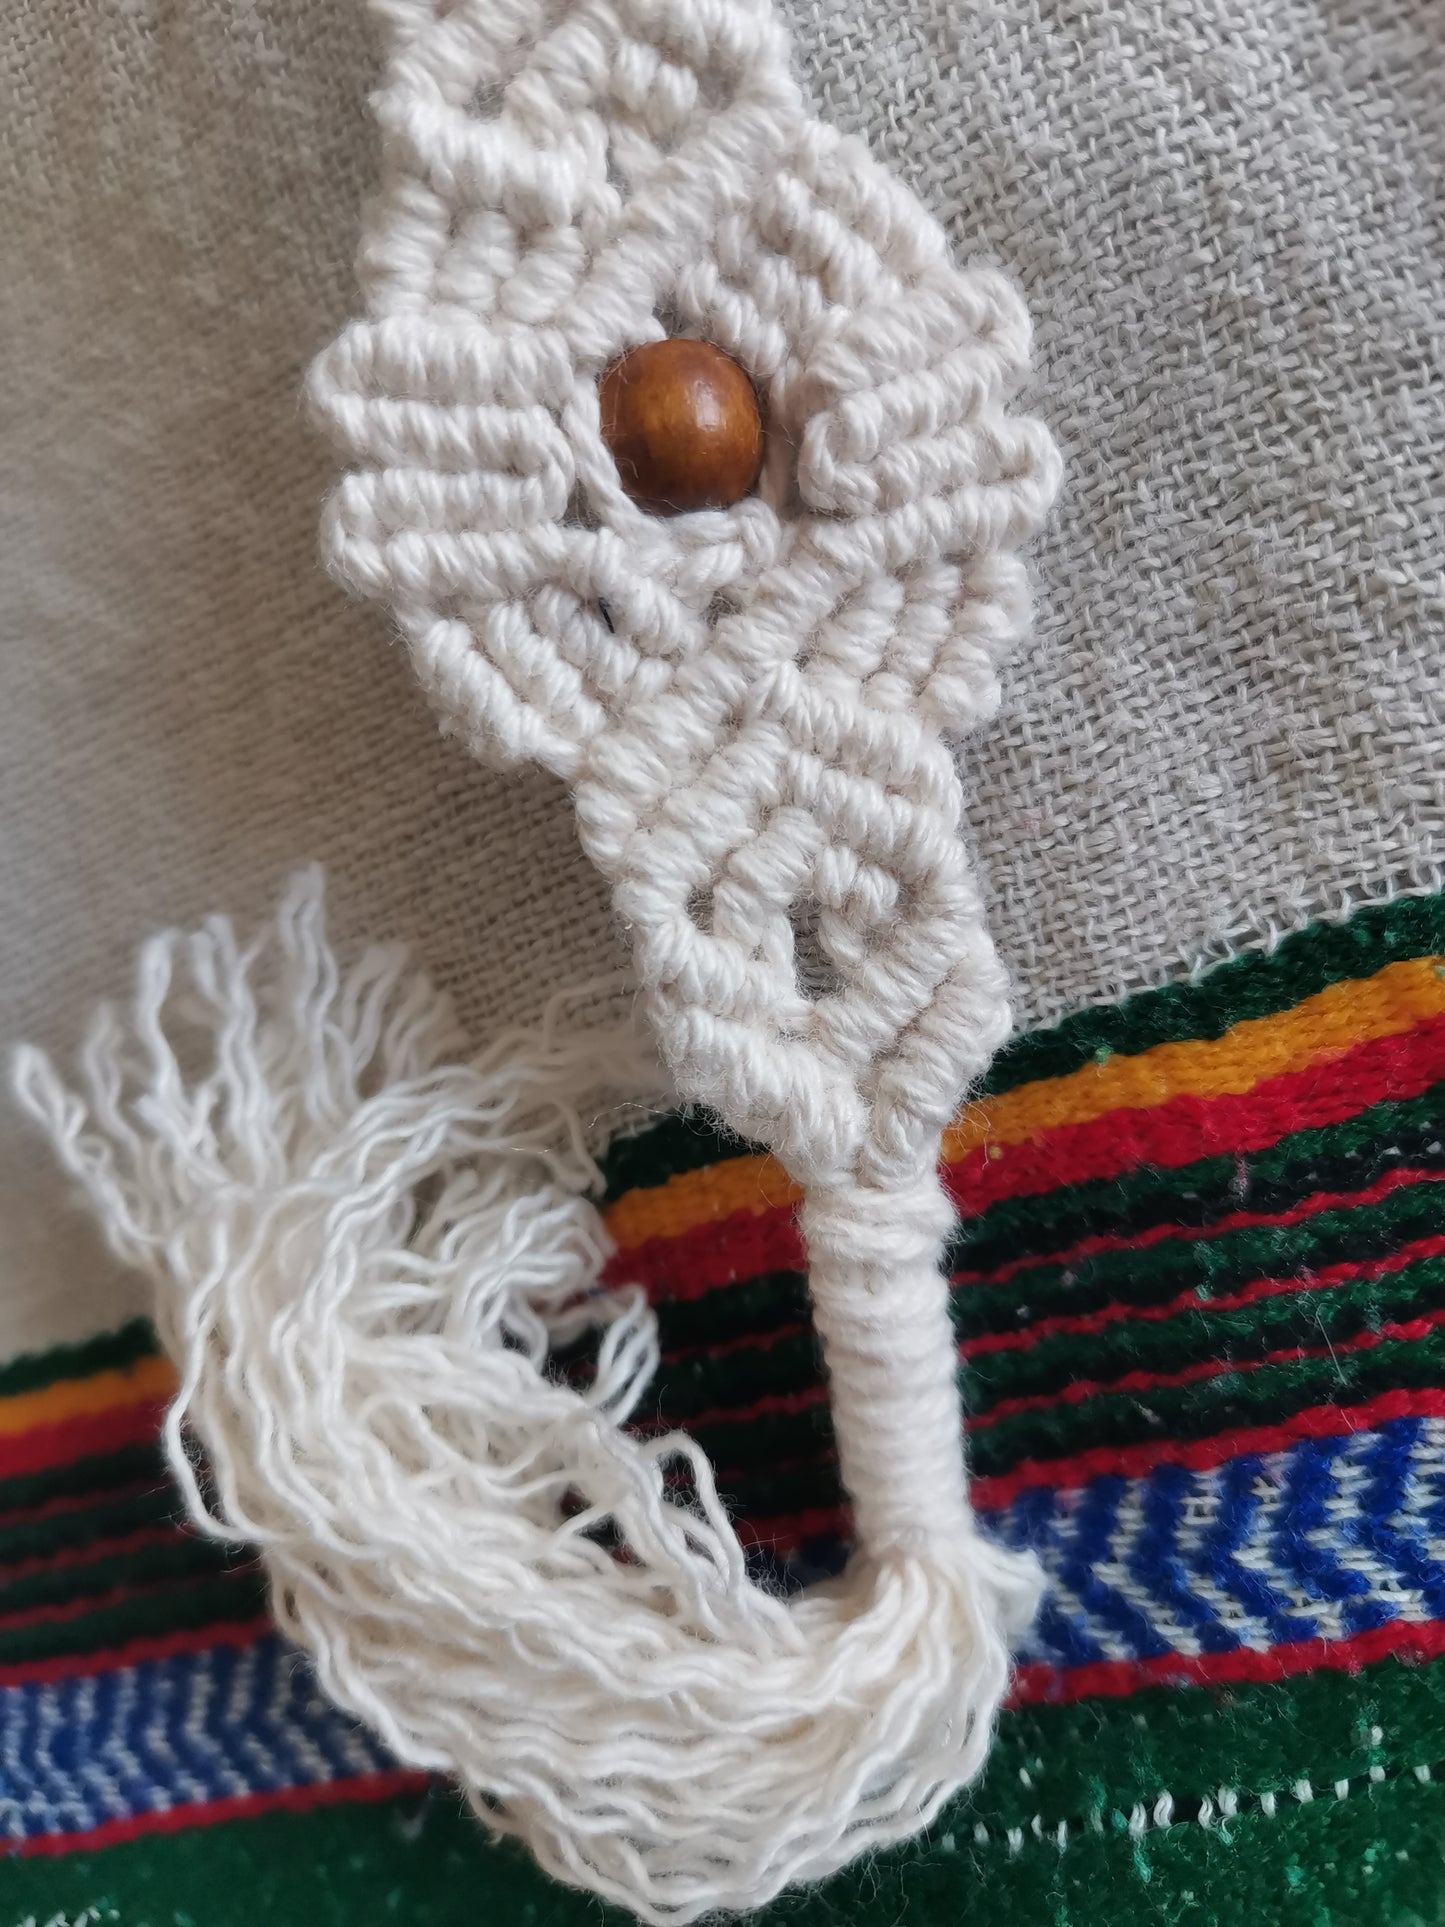 "Jungle Flower" Macrame Bookmark with beads